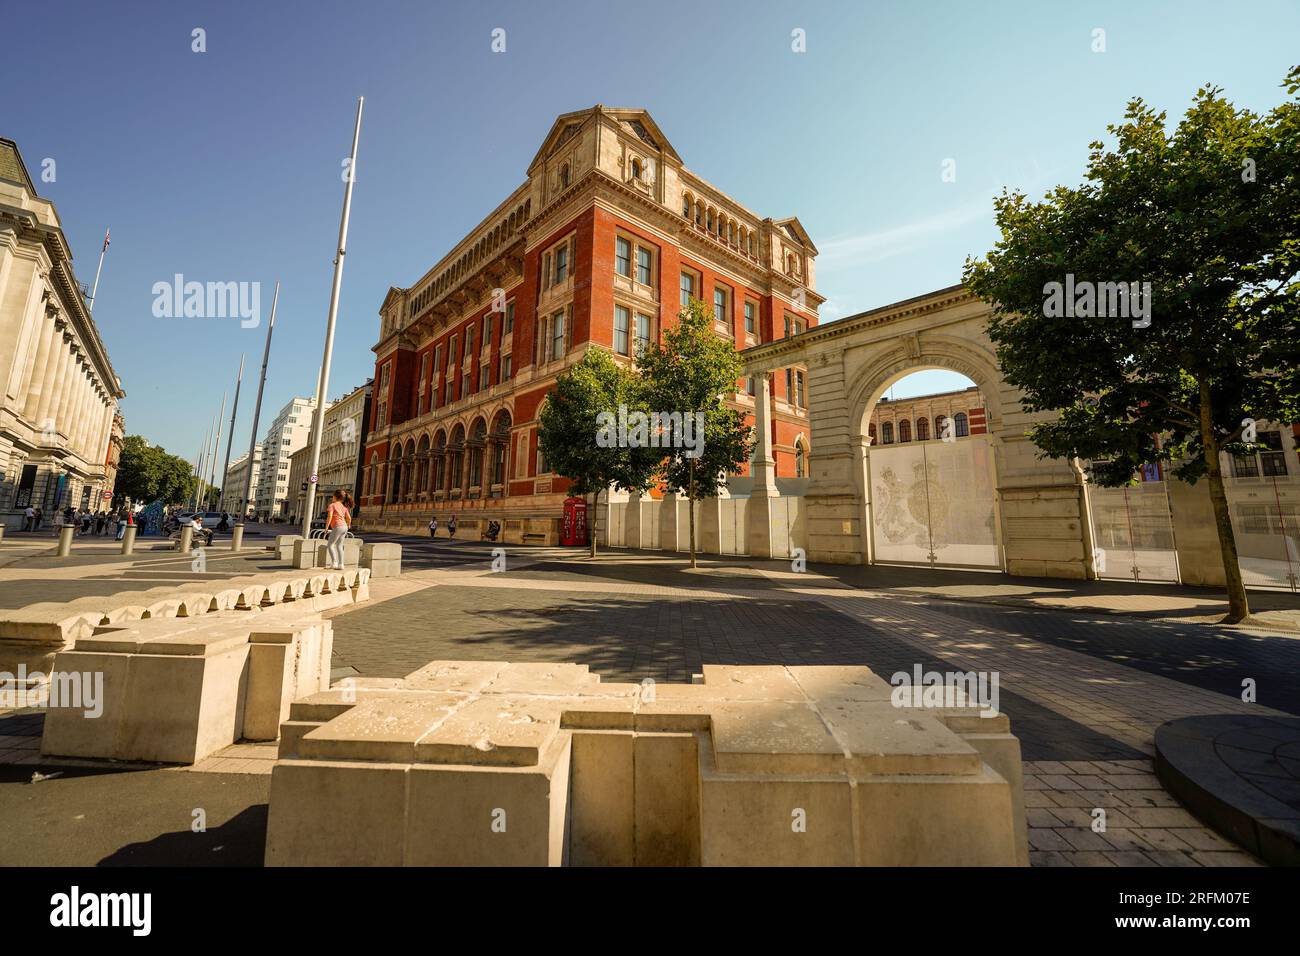 London, England, UK - July 29, 2022. Victoria and Albert Museum, VA, V&A Museum, world's largest museum of applied arts, decorative arts and design. Stock Photo